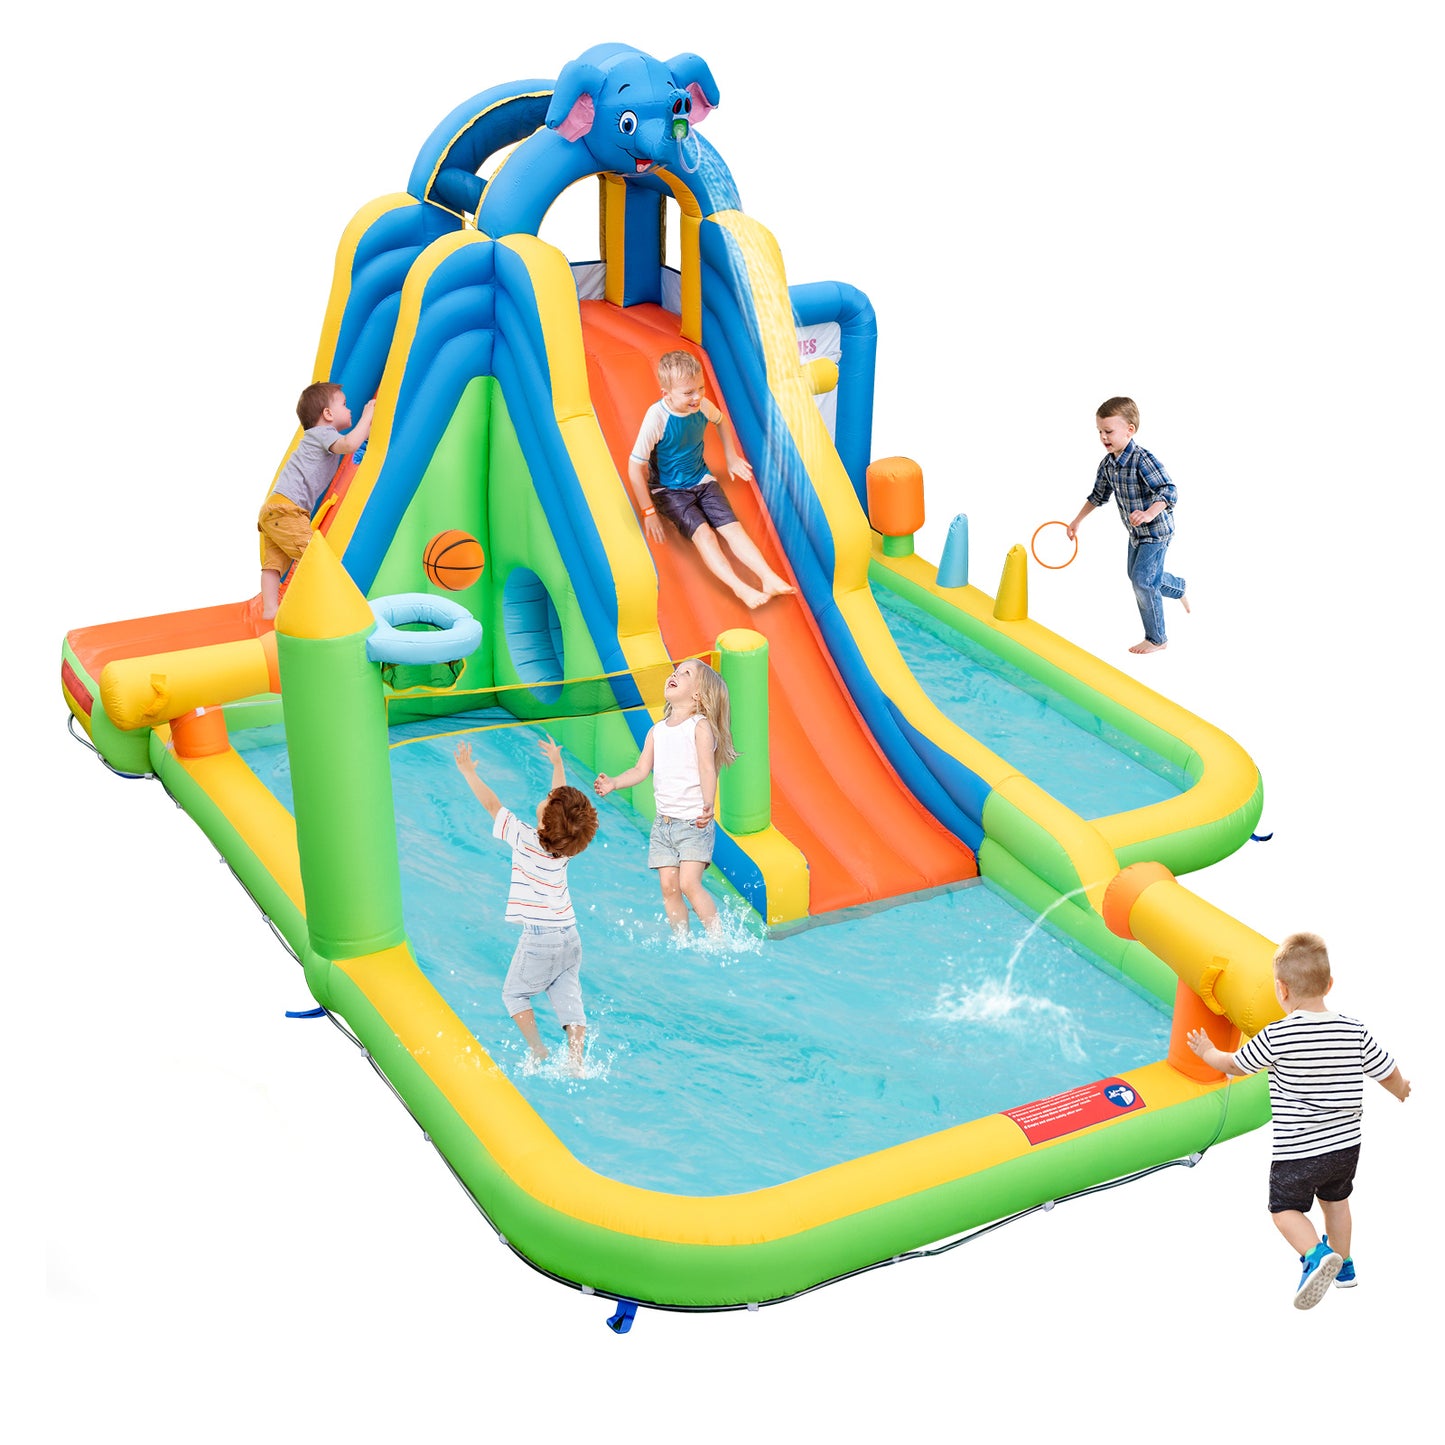 Giant Inflatable Water Slide With Splash Pools